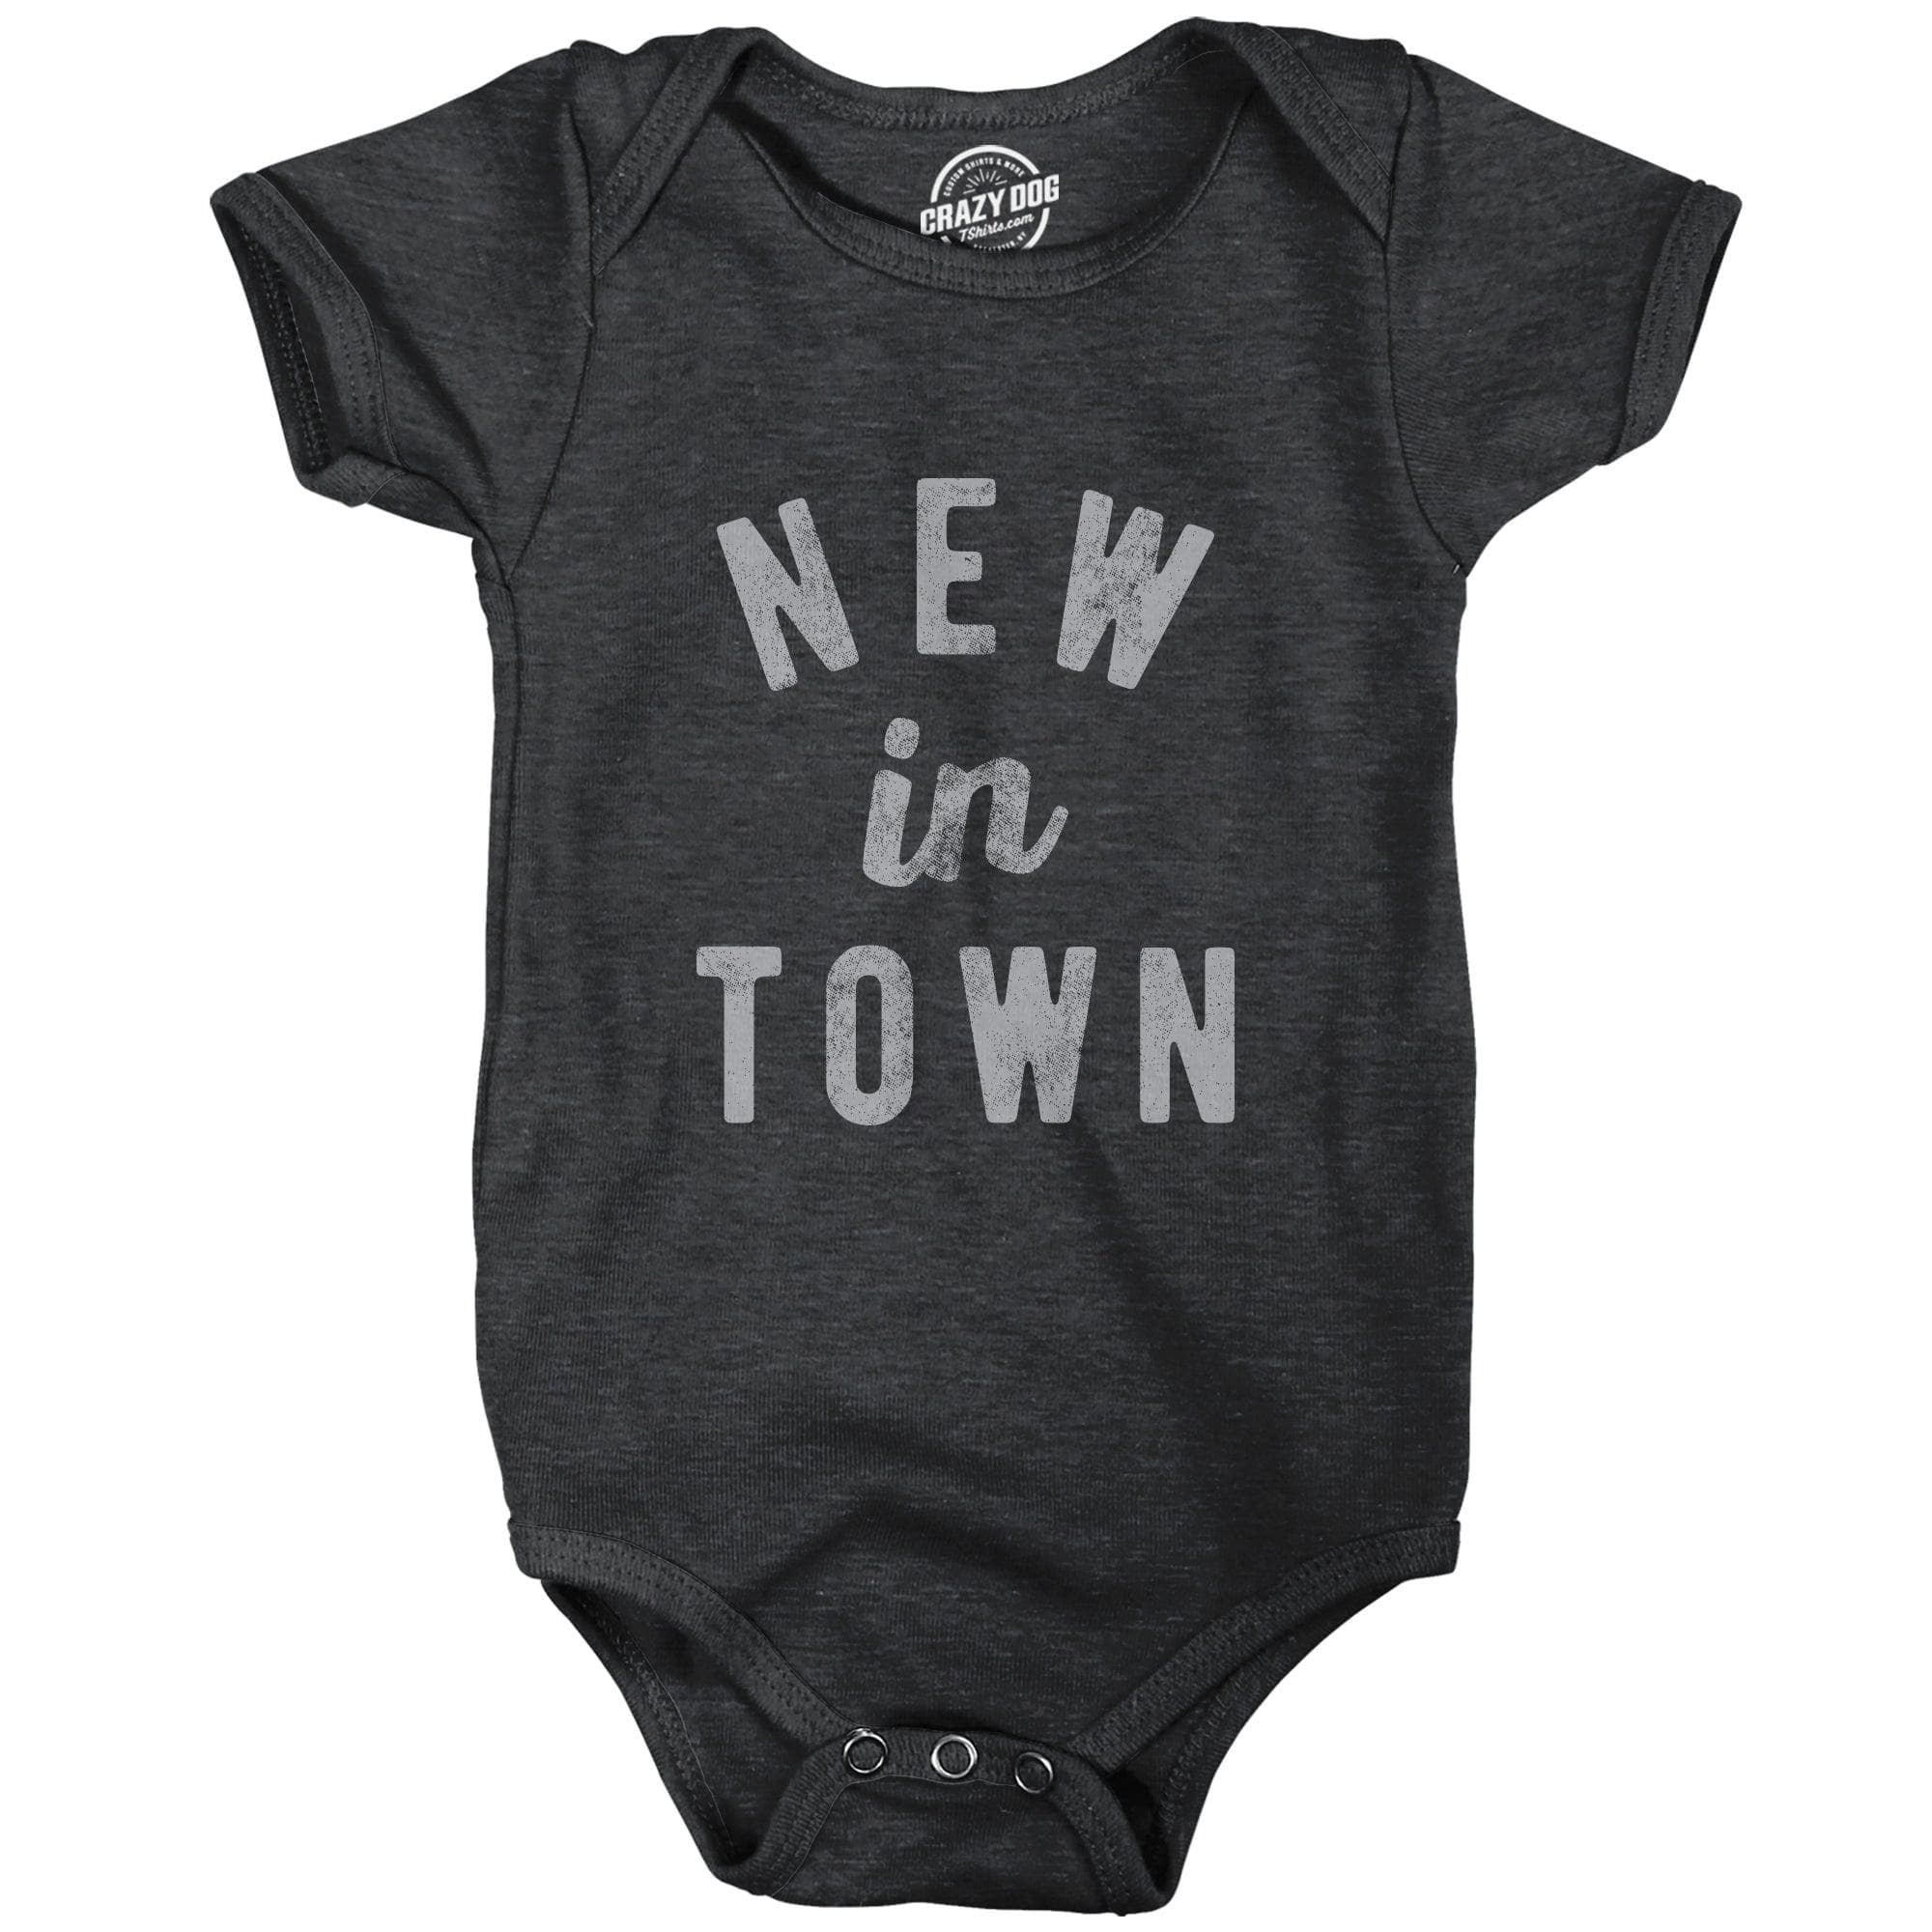 New In Town Baby Bodysuit  -  Crazy Dog T-Shirts